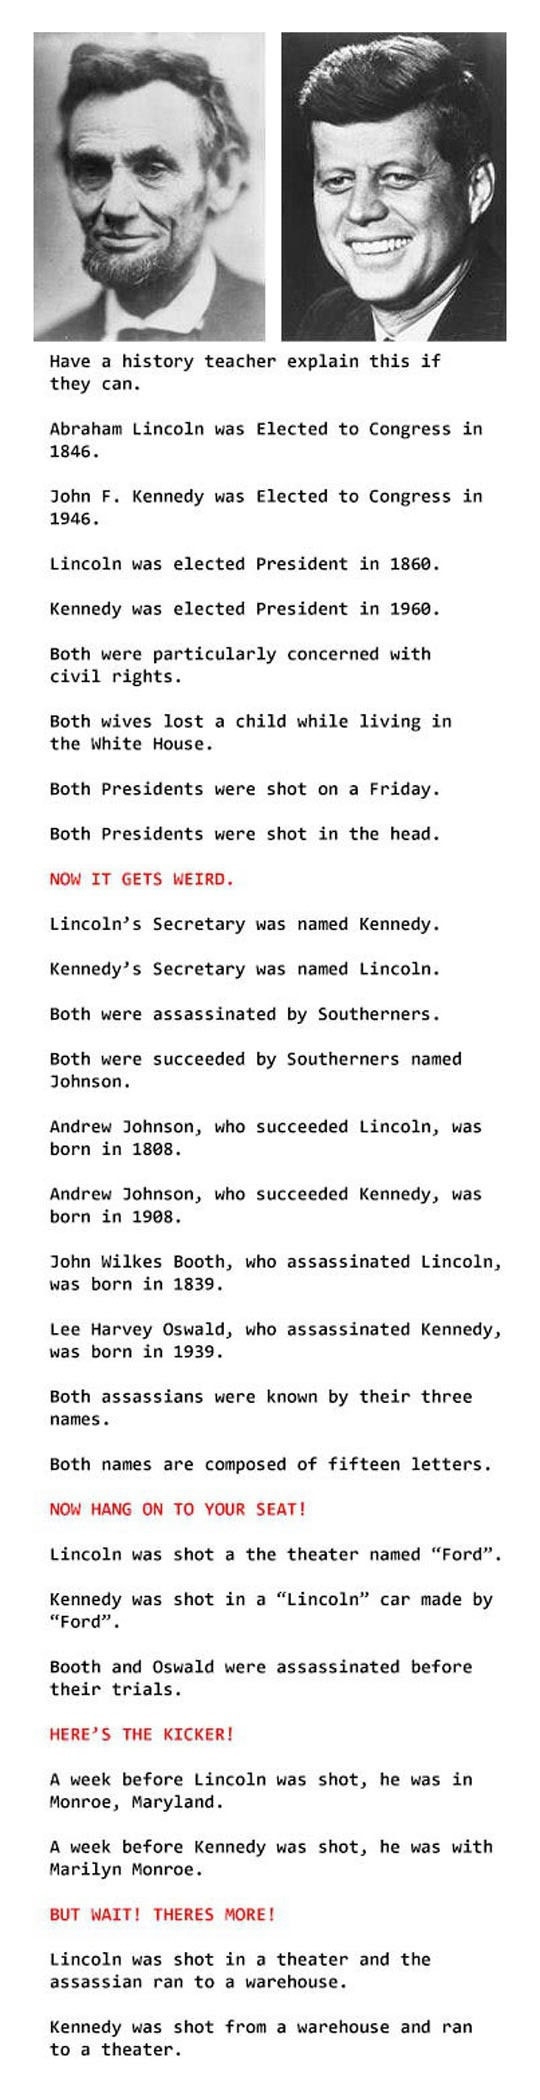 Mind-blowing coincidences